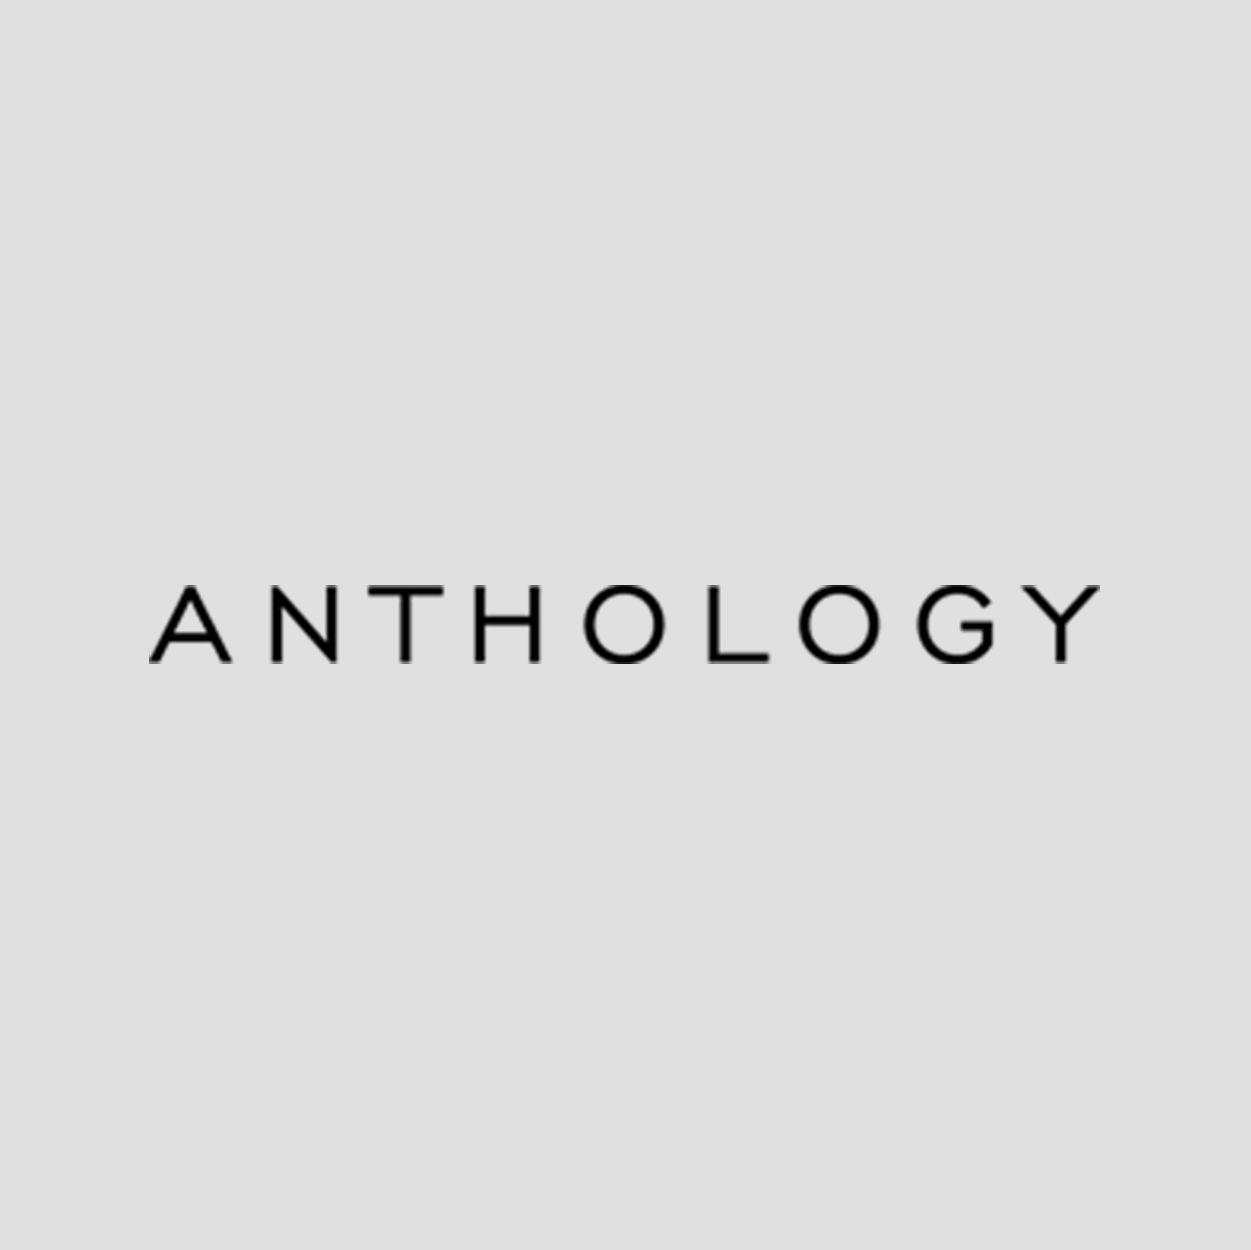 Anthology Logo - Anthology, luxury, industrial chic wallpapers - London Wallpaper Company